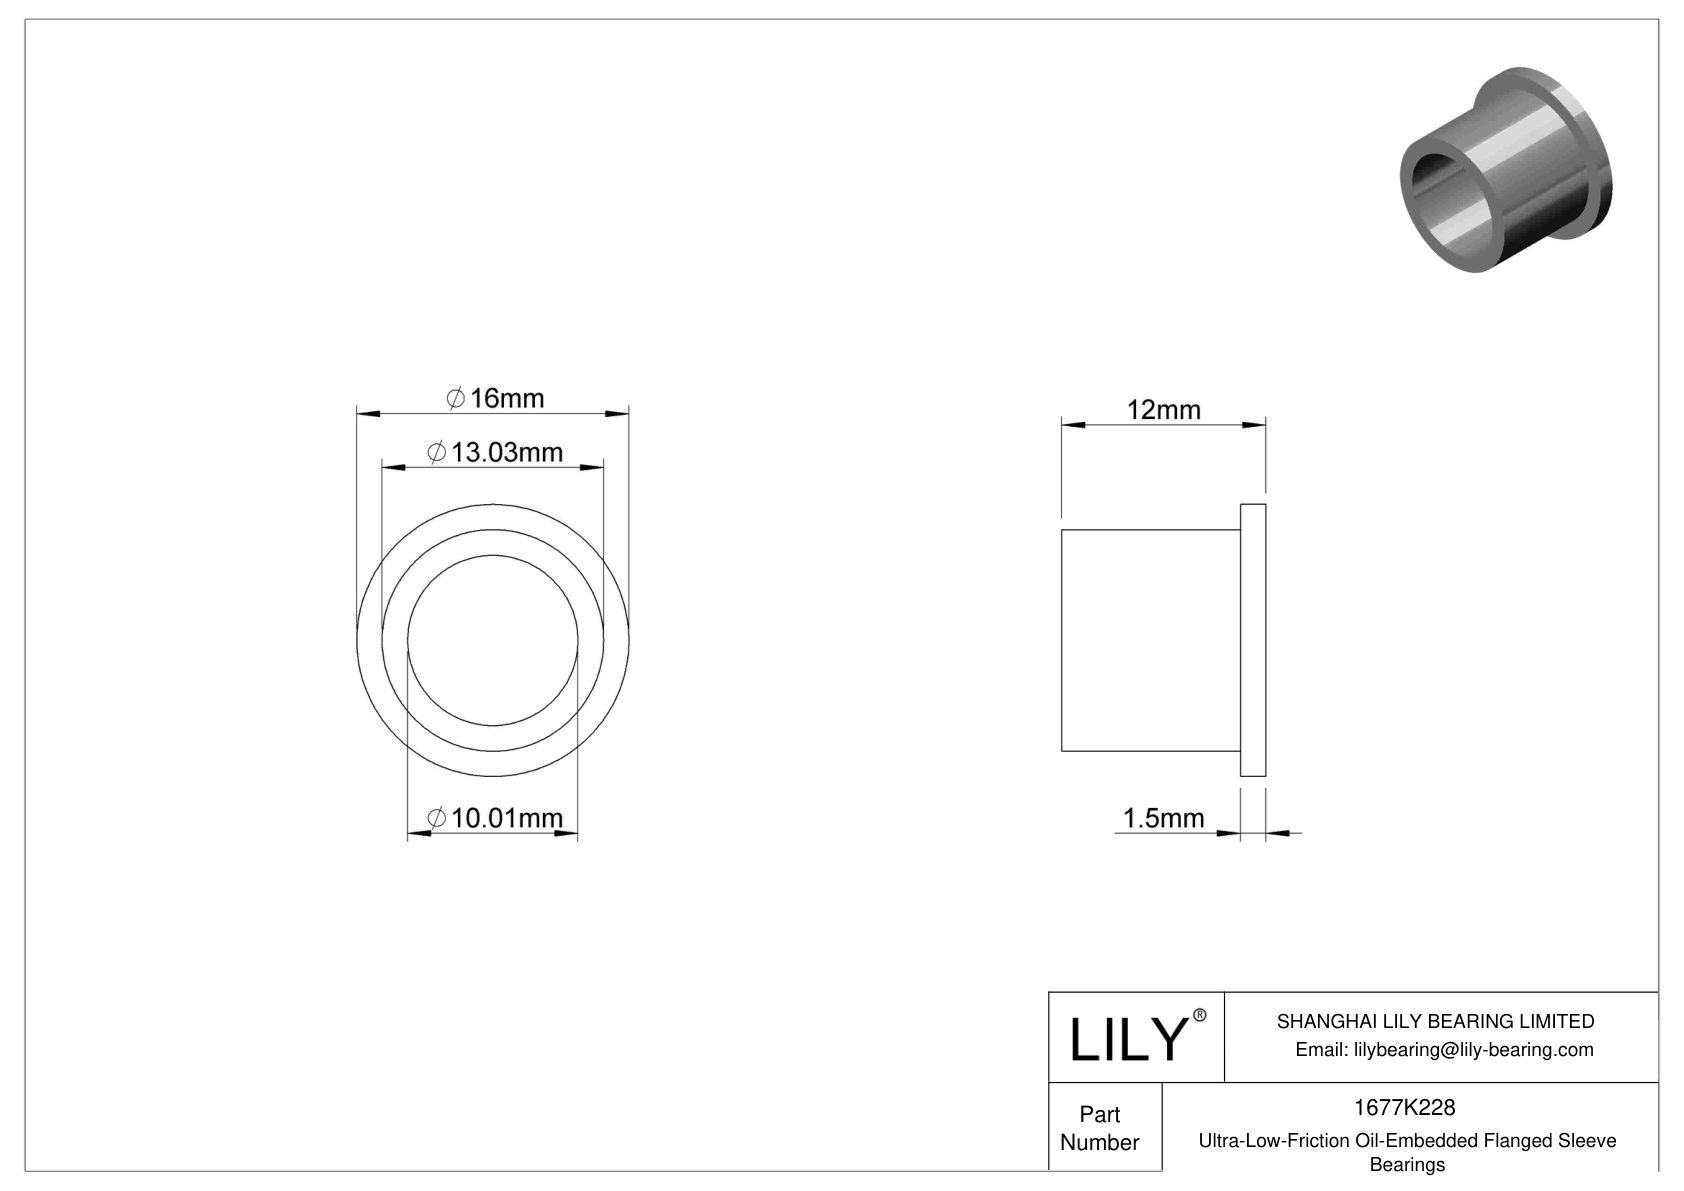 BGHHKCCI Ultra-Low-Friction Oil-Embedded Flanged Sleeve Bearings cad drawing